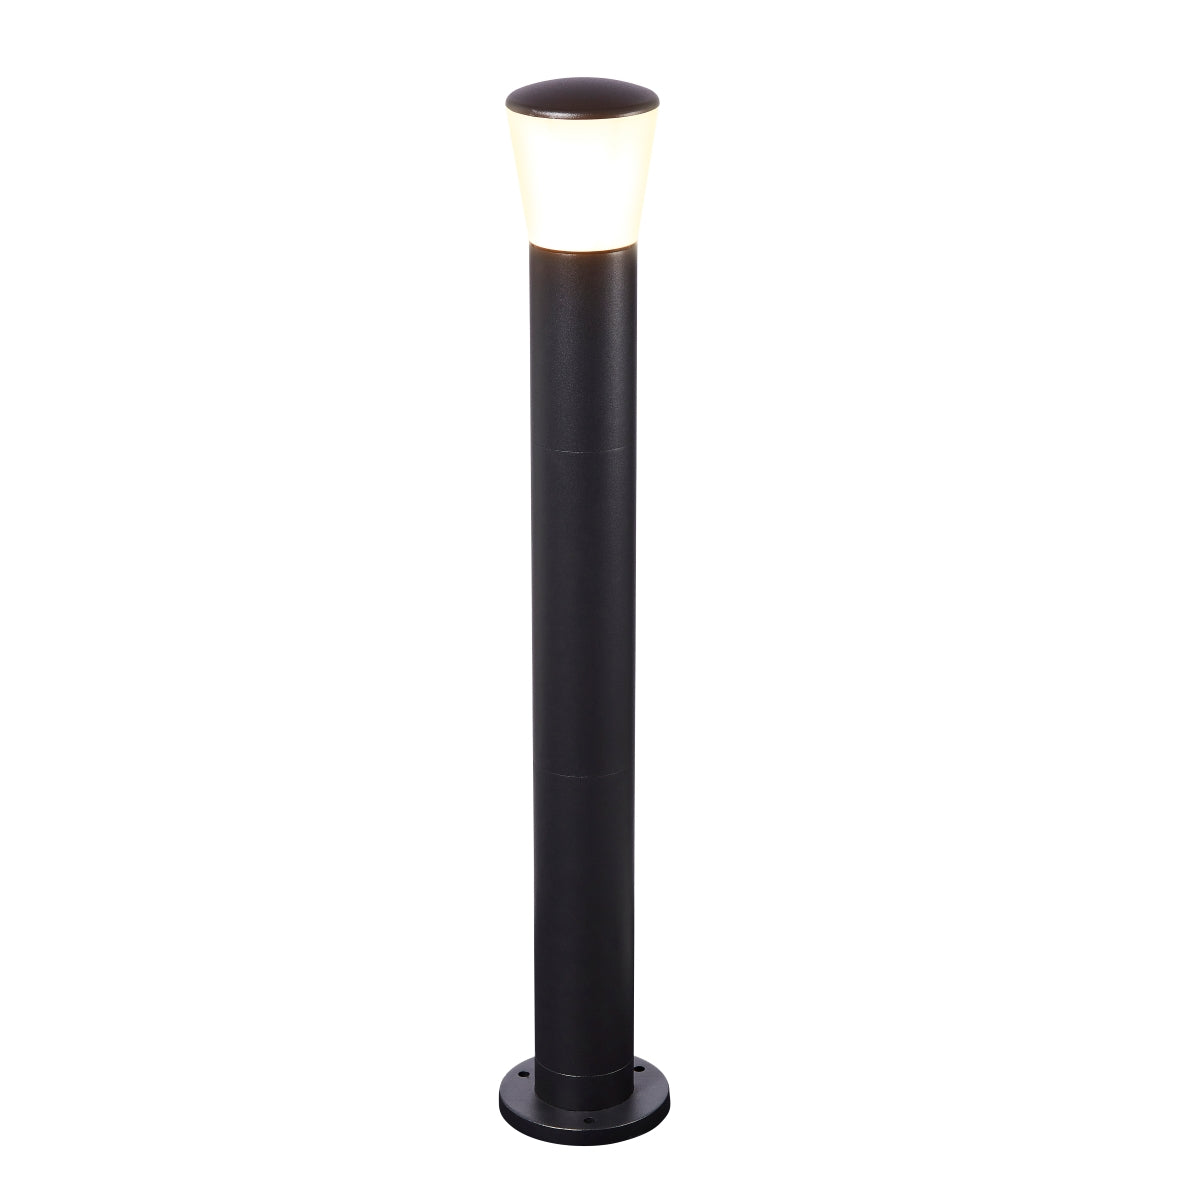 Our Otis black outdoor post light would look perfect in a modern or more traditional home design. Outside post lights can provide atmospheric light in your garden, at the front door or on the terrace as well as a great security solution. It is designed for durability and longevity with its robust material producing a fully weatherproof and water resistant light fitting